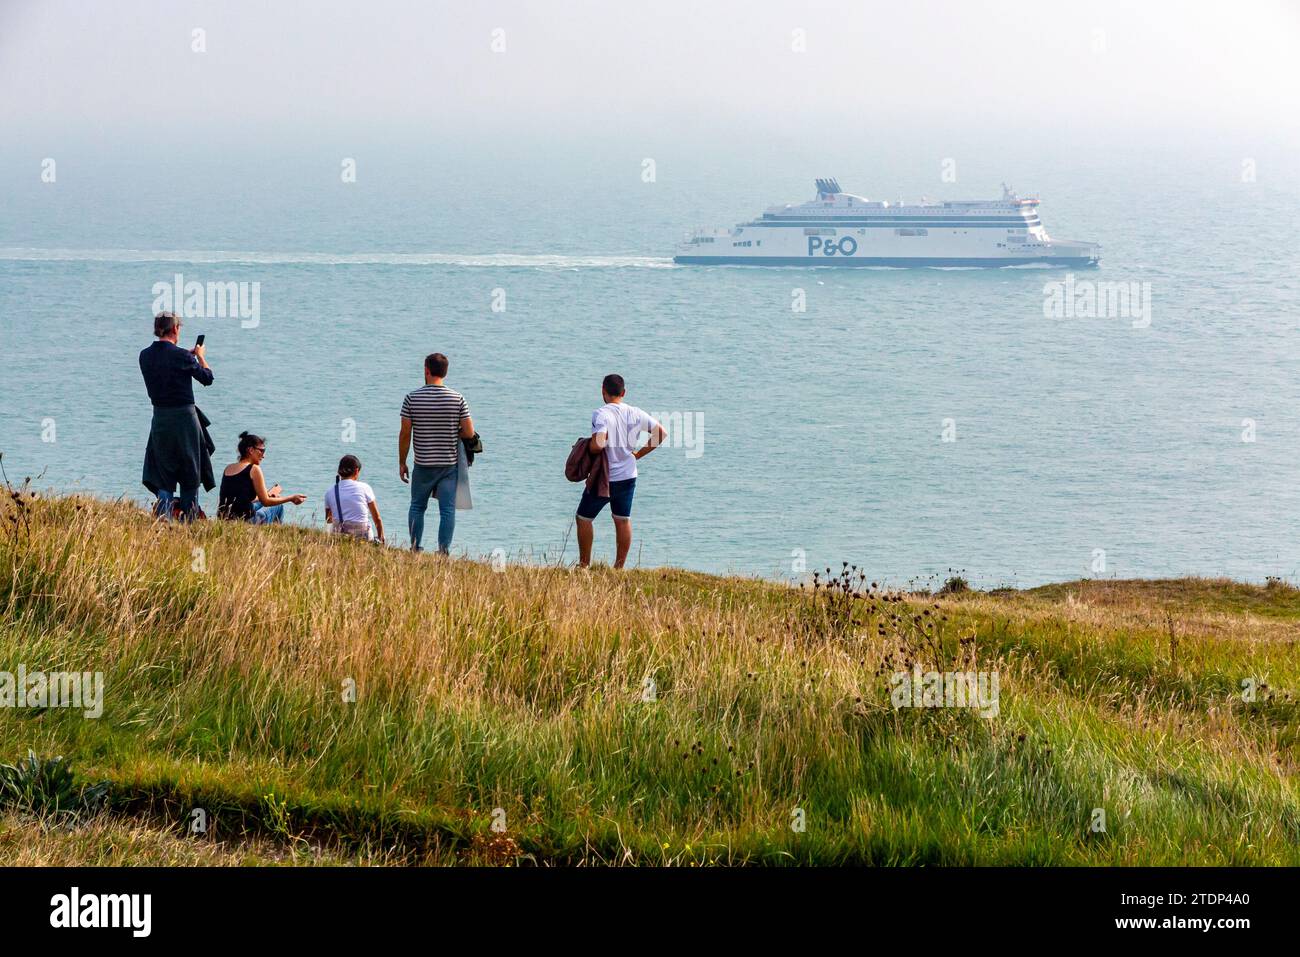 Group of people watching a P&O car ferry cross channel ferry from the White Cliffs of Dover on the Kent coast south east England UK. Stock Photo